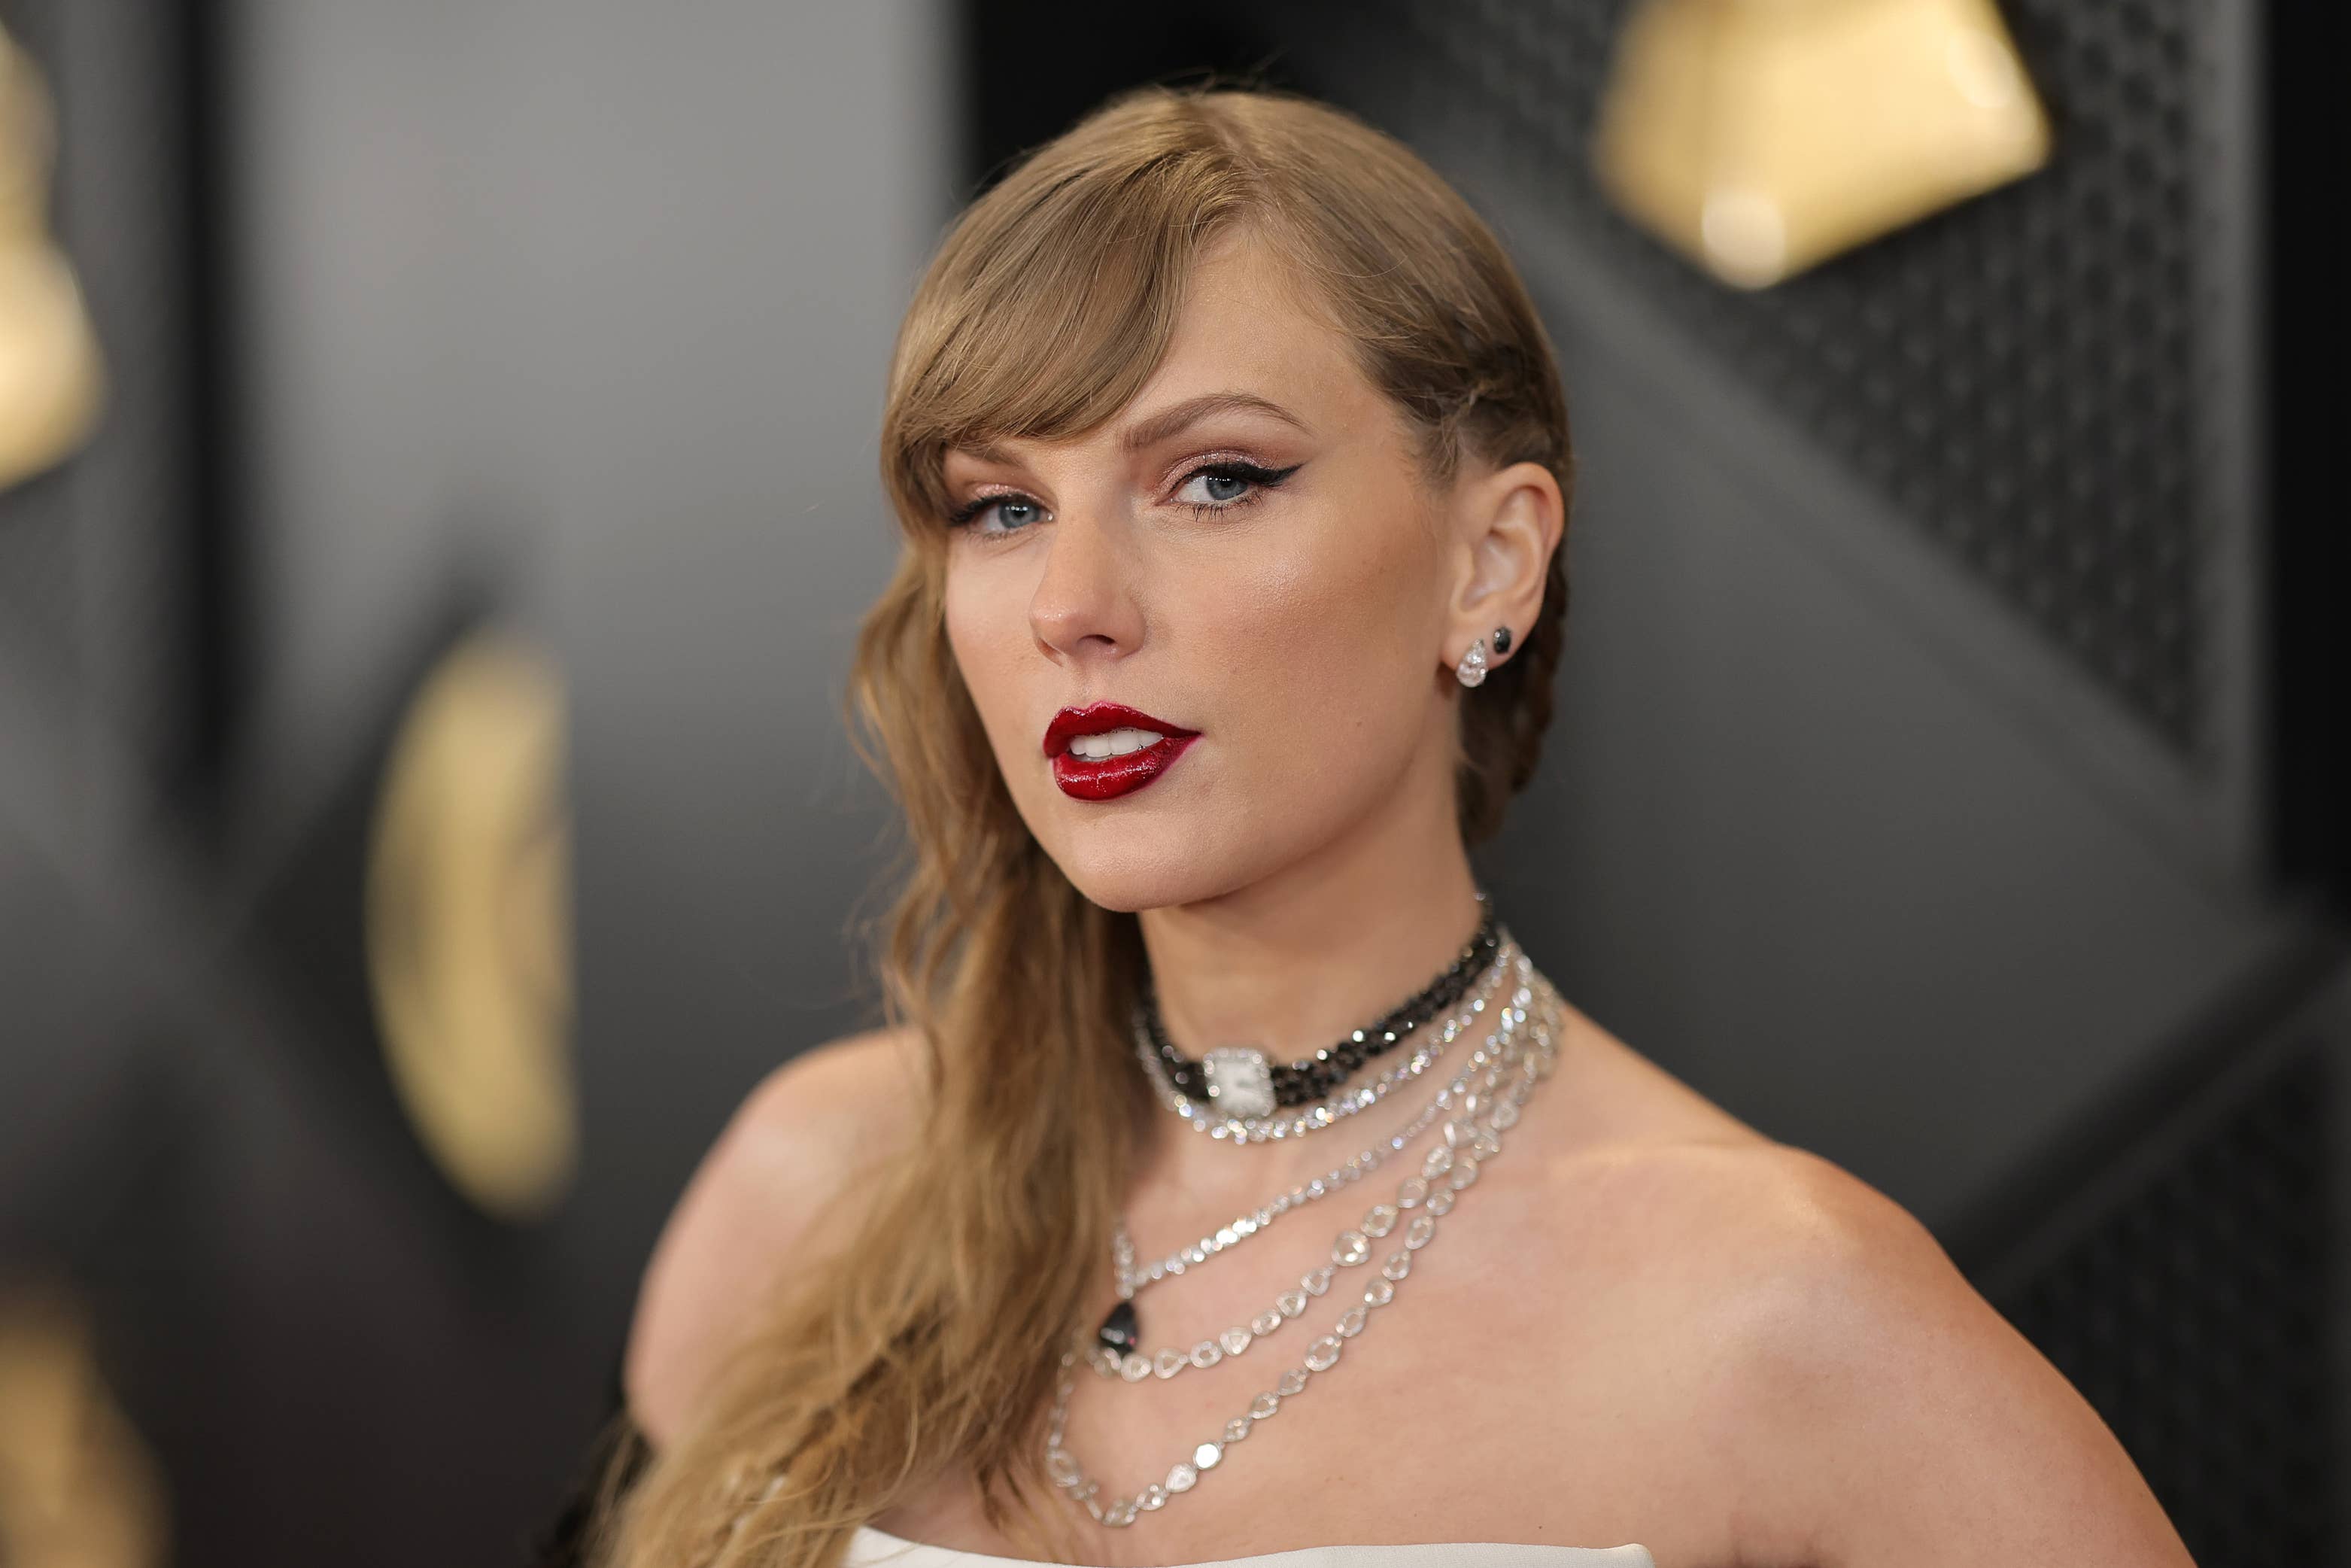 Taylor Swift wears an off-shoulder dress with layered necklaces at an event